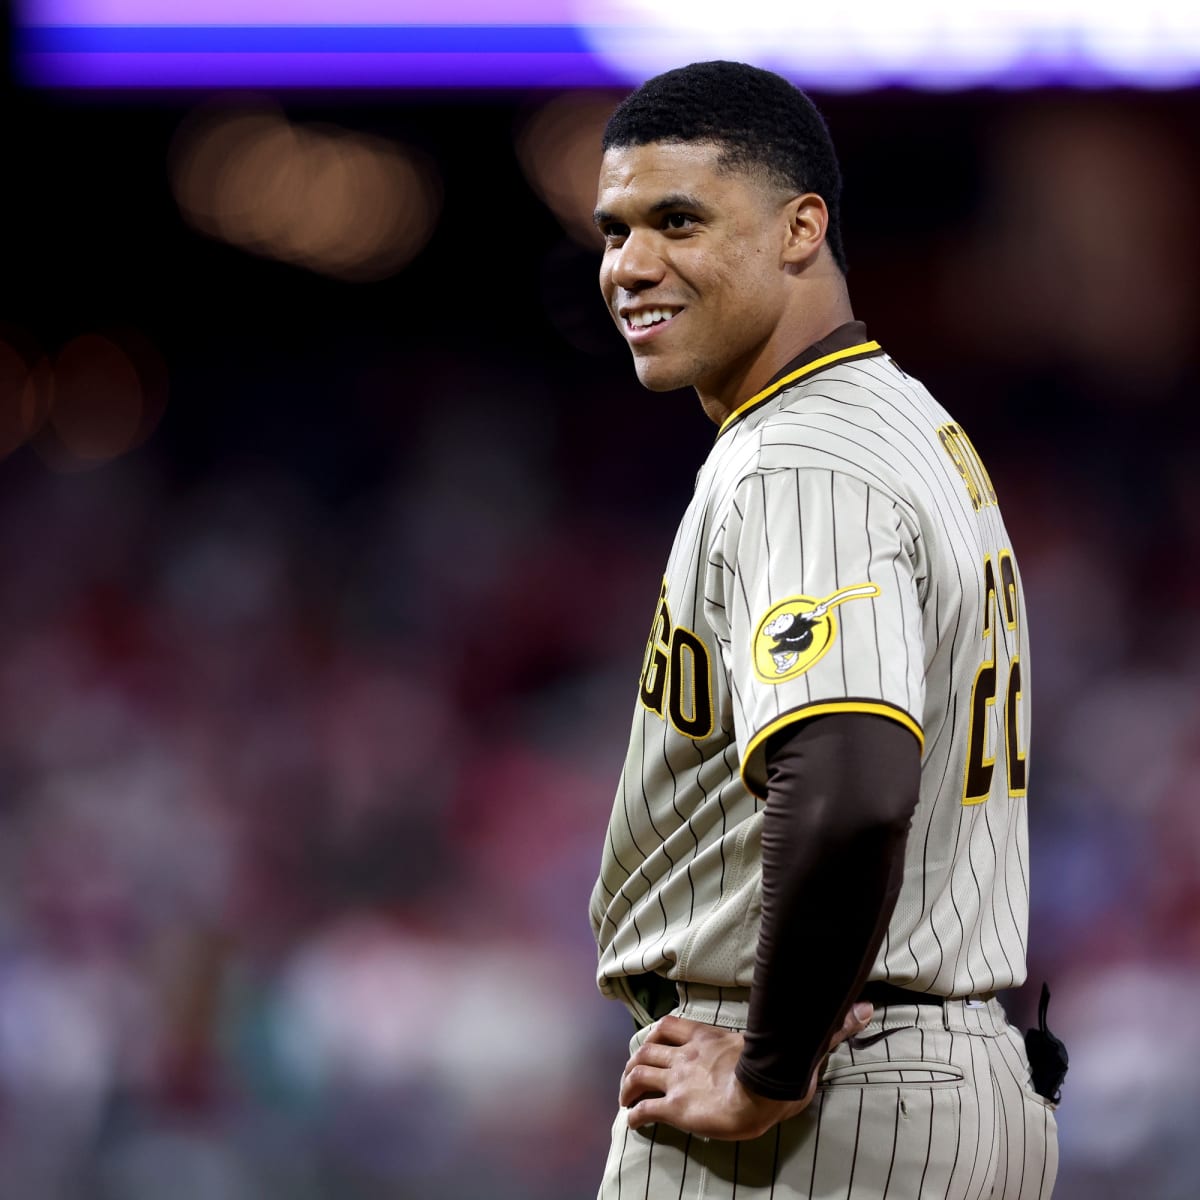 Padres News: Twitter Shares Crazy Juan Soto Theory After Tuesday Game Delay  - Sports Illustrated Inside The Padres News, Analysis and More